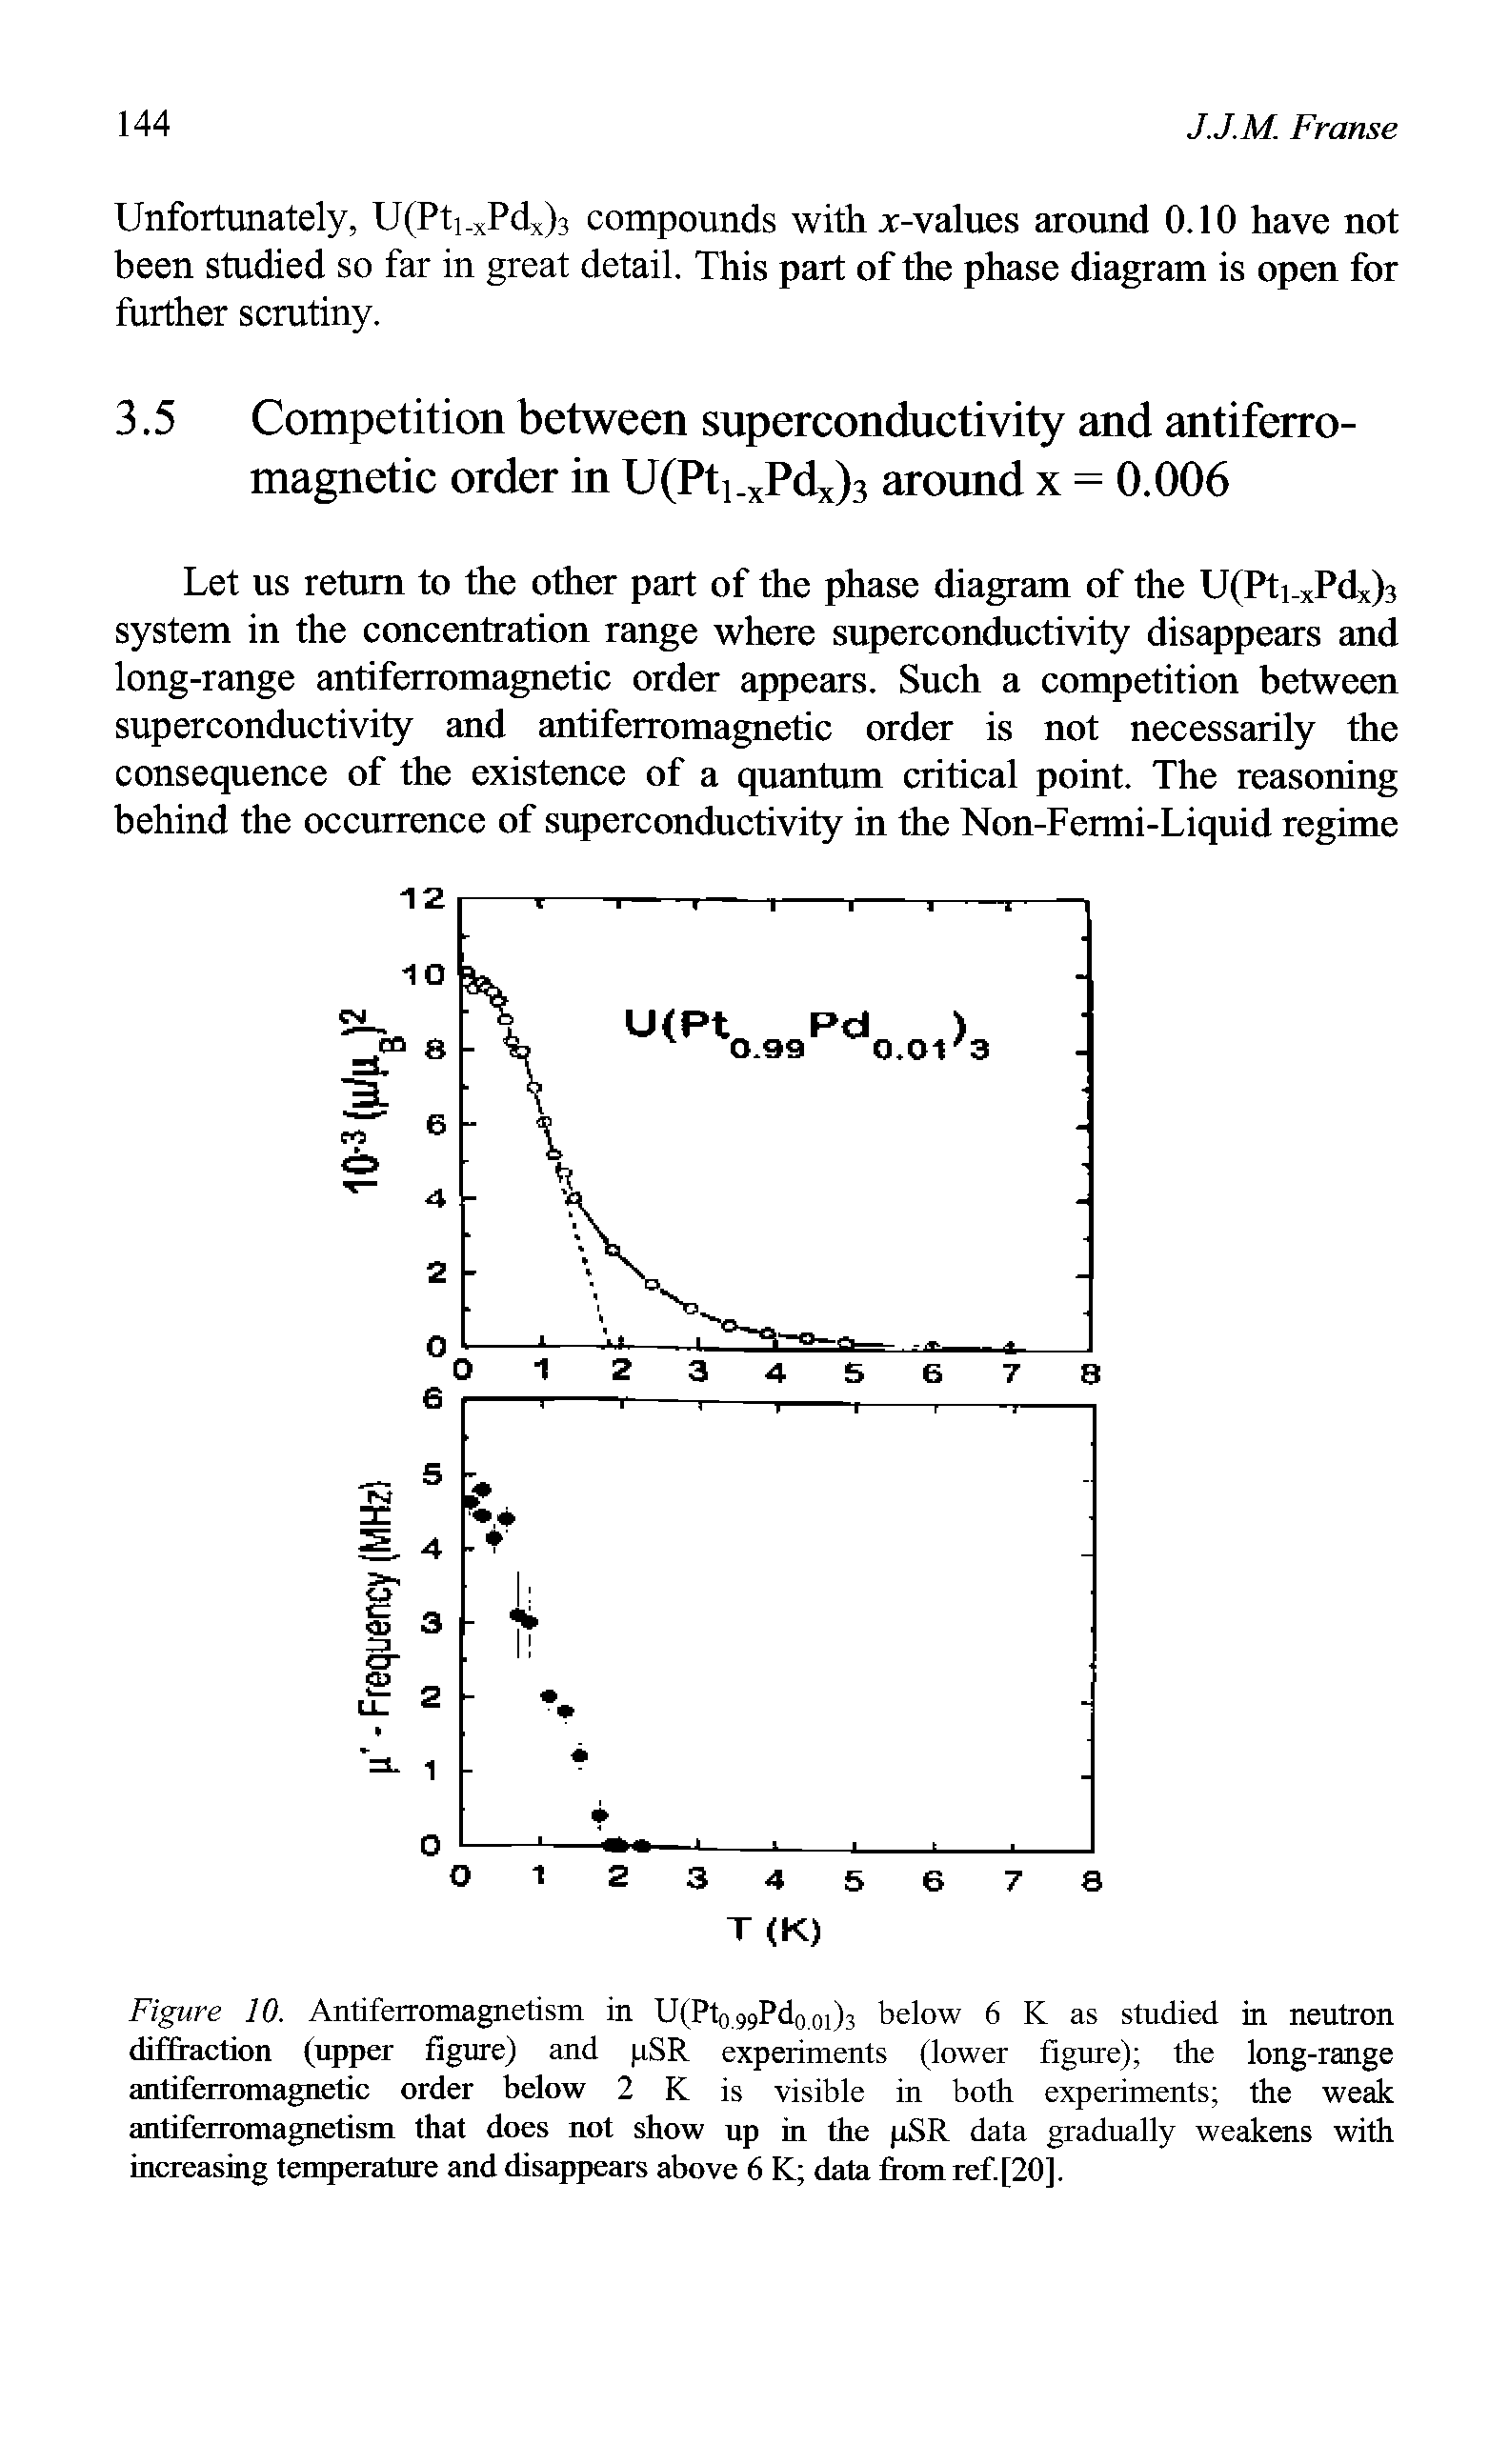 Figure 10. Antiferromagnetism in U(Pto 99Pd0 01)3 below 6 K as studied in neutron diffraction (upper figure) and pSR experiments (lower figure) the long-range antiferromagnetic order below 2 K is visible in both experiments the weak antiferromagnetism that does not show up in the pSR data gradually weakens with increasing temperature and disappears above 6 K data from ref. [20].